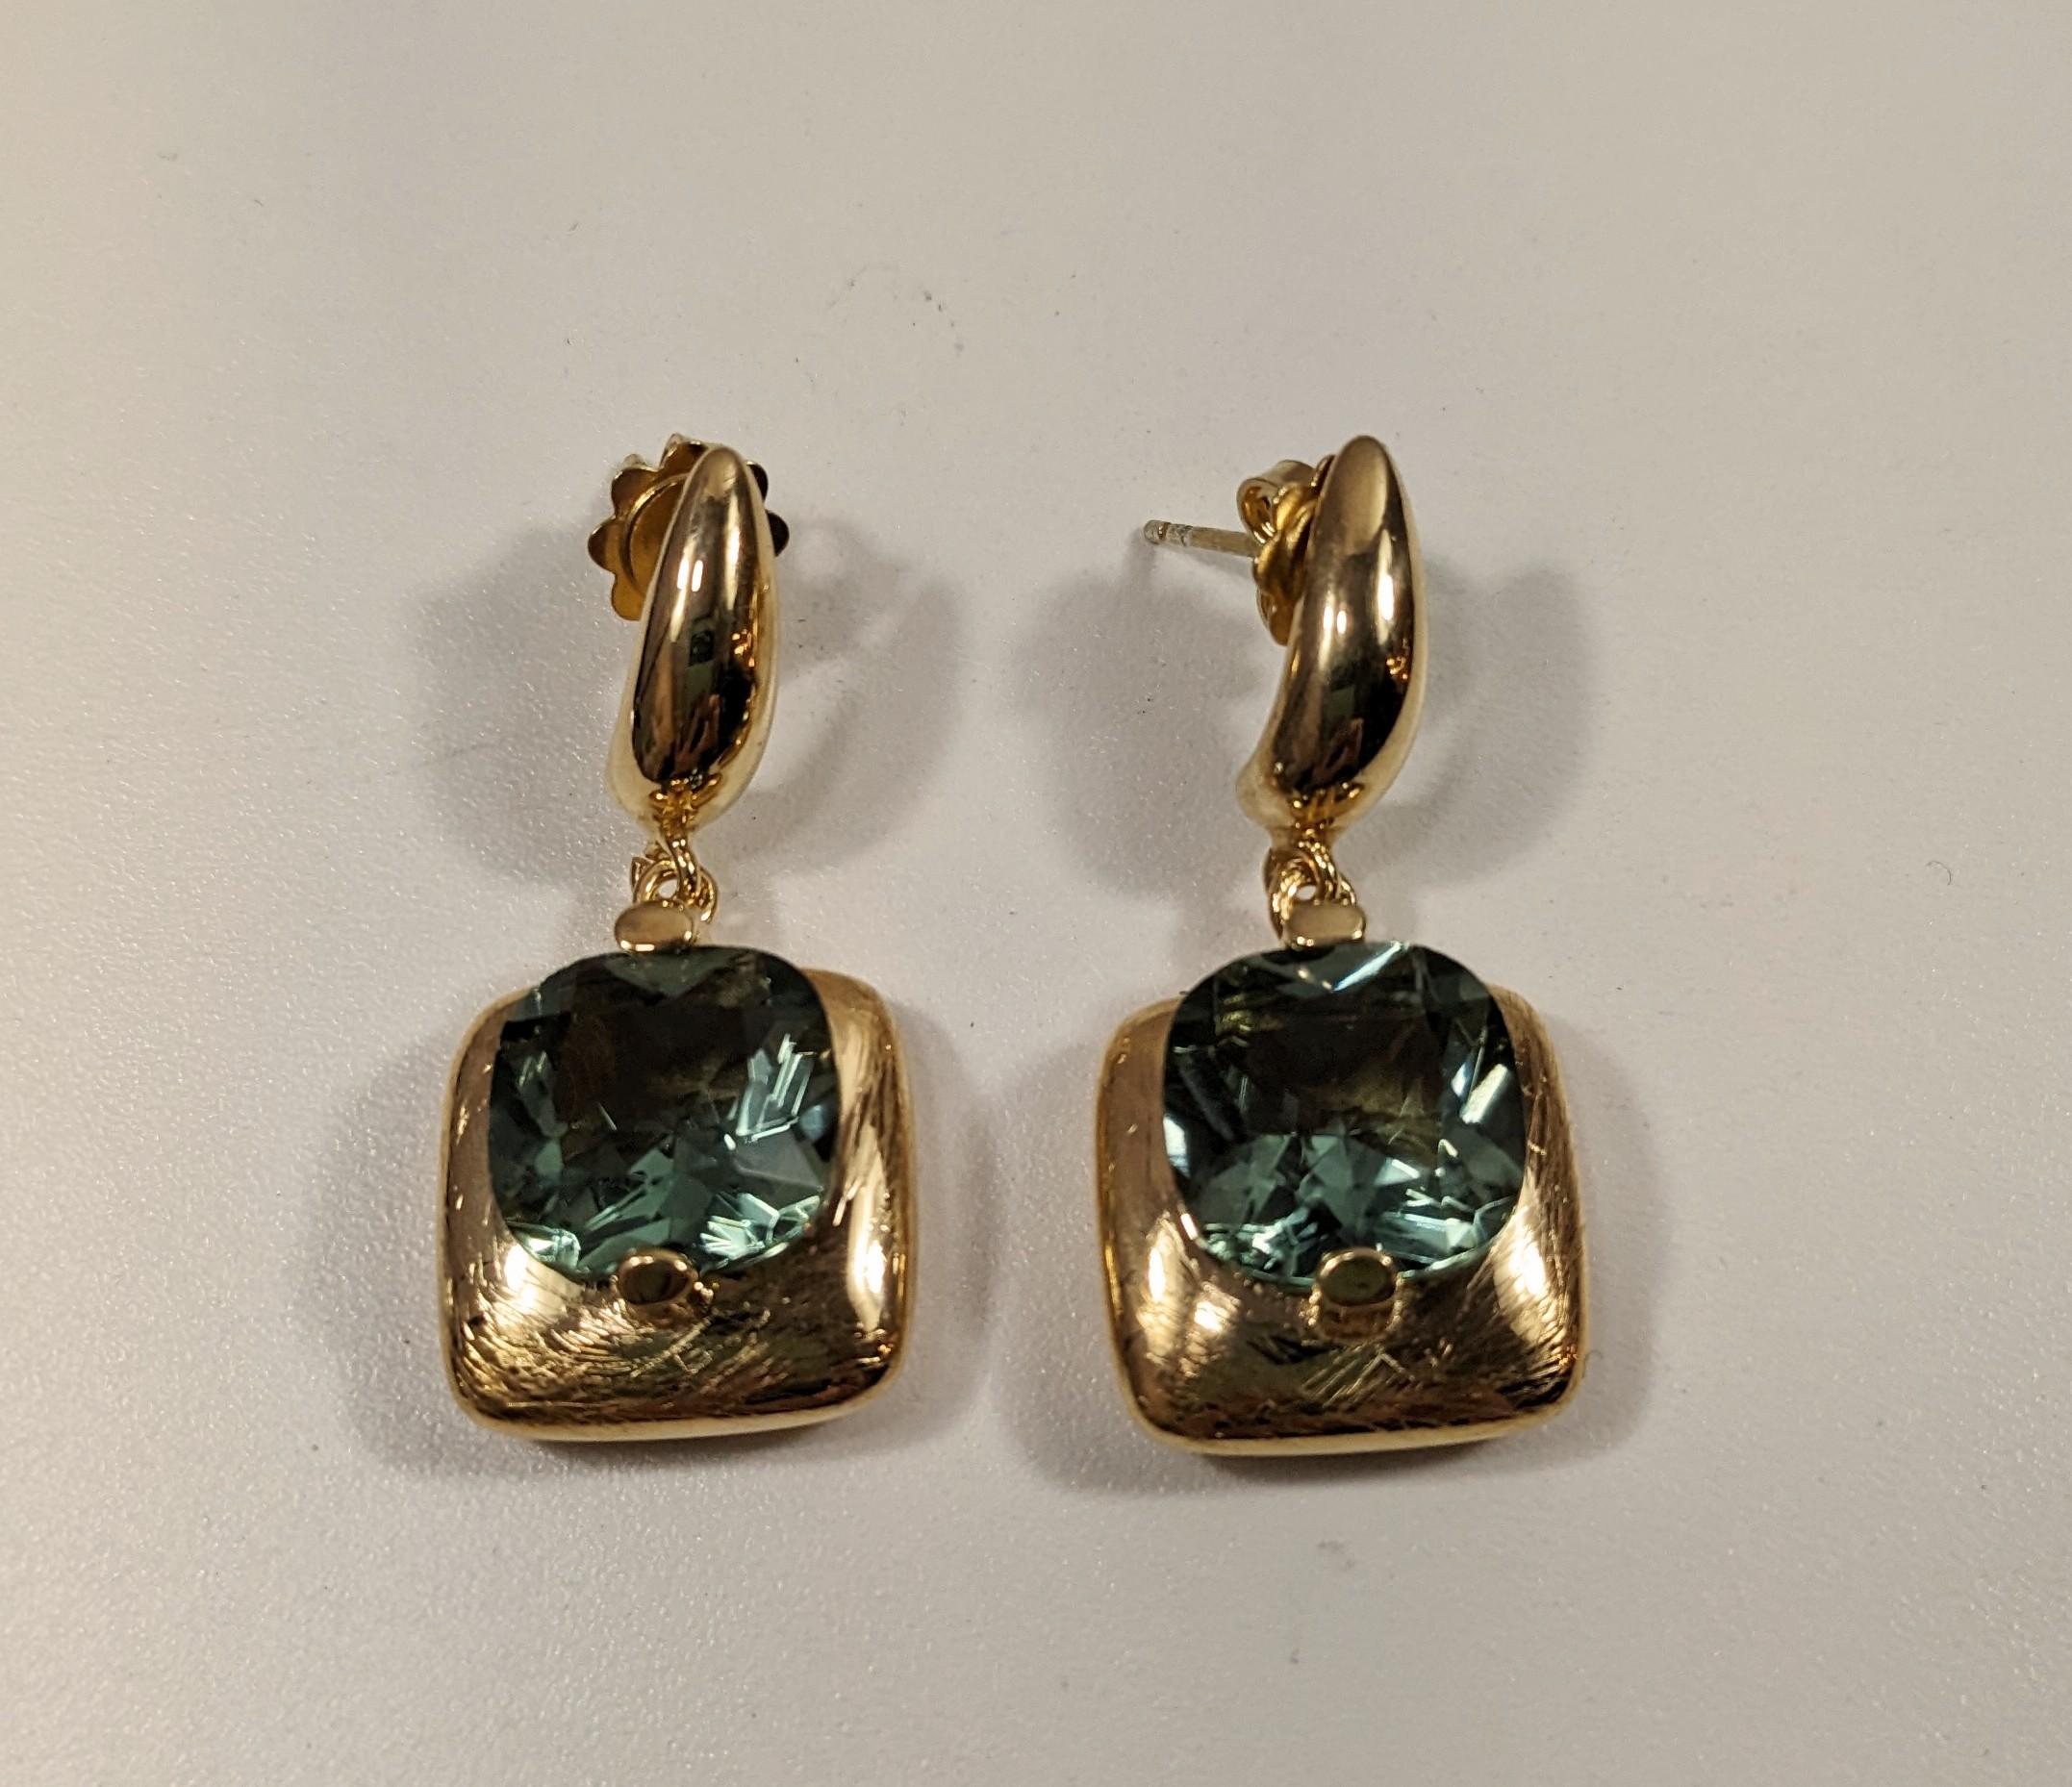  Earrings with three carré cut quartz stones in gold plated silver cognac finish For Sale 3